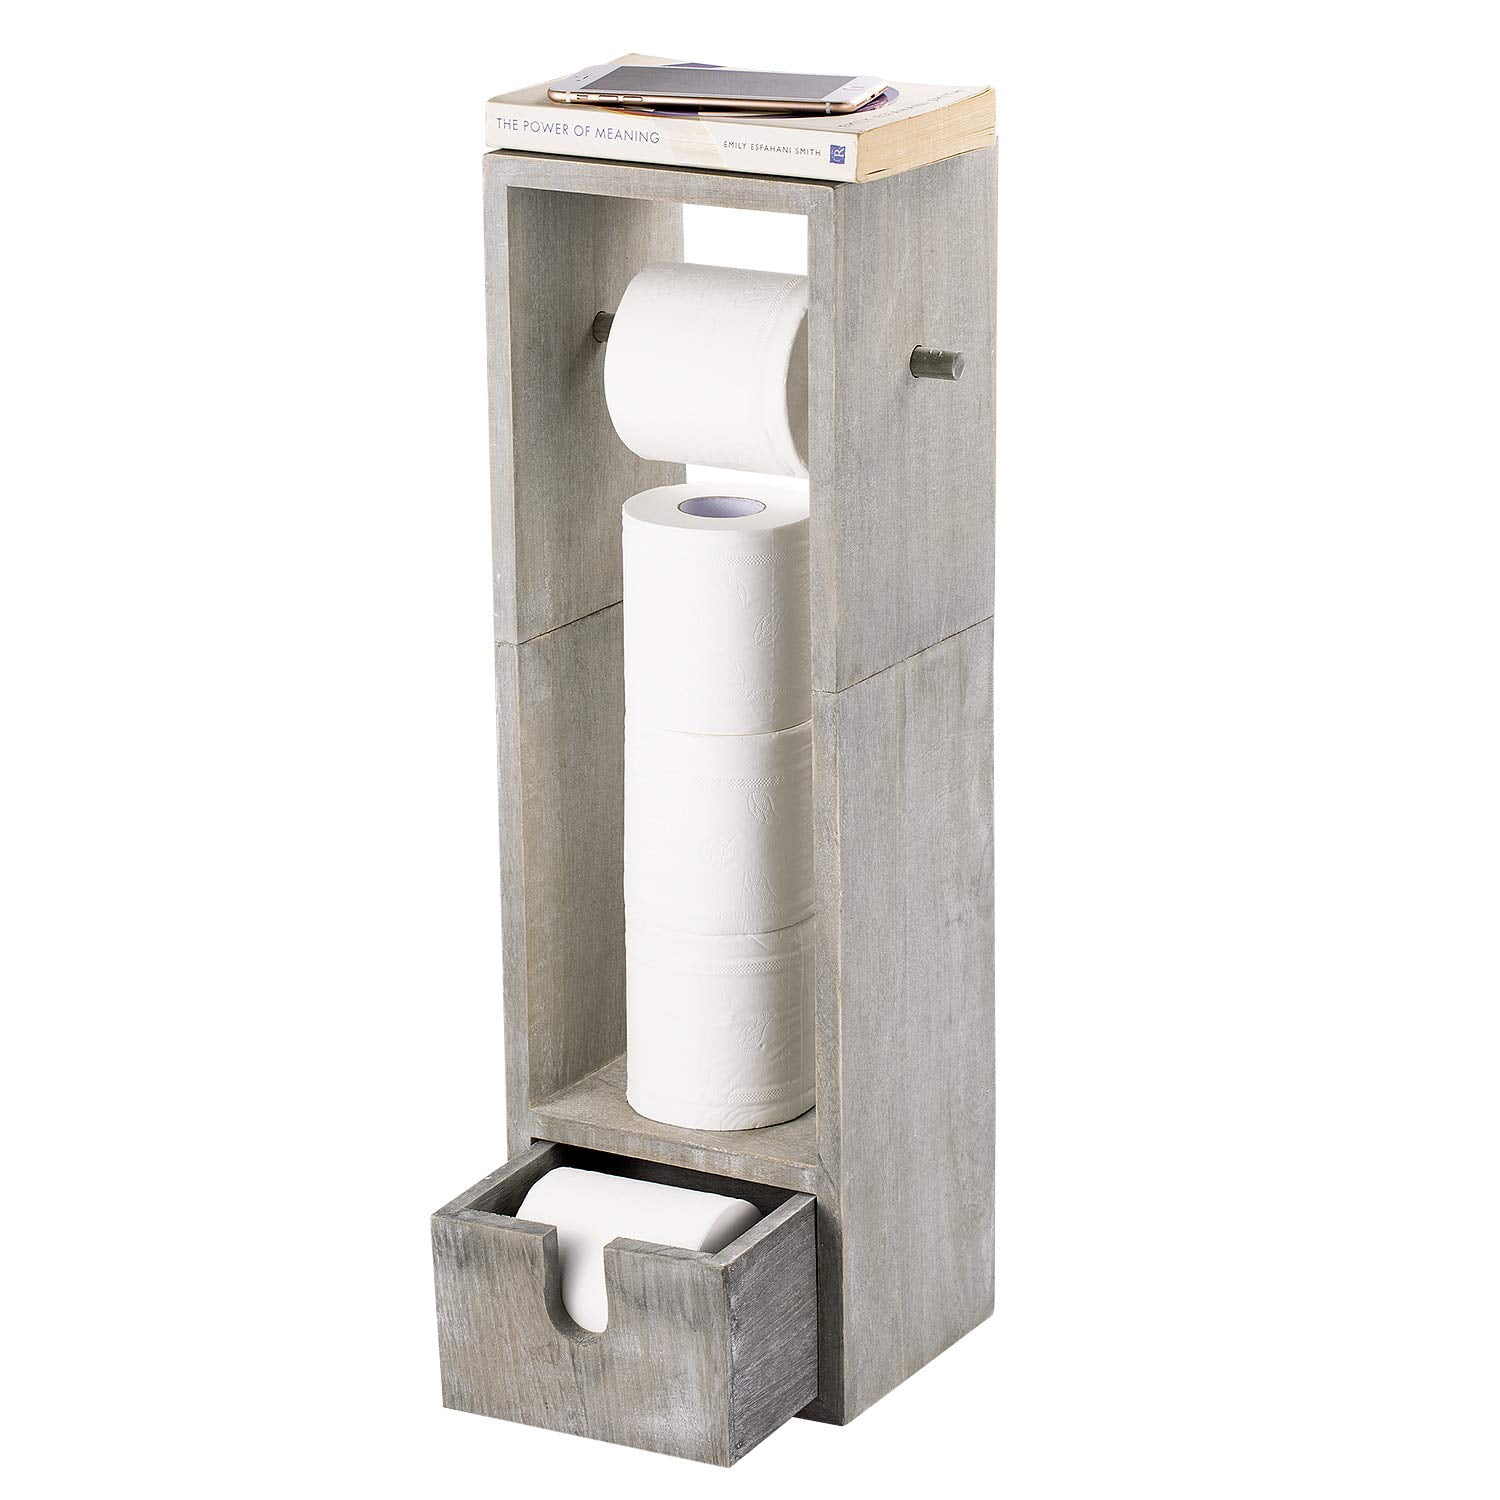 Oumilen Freestanding Toilet Paper Holder Iron Pipe with Solid Wooden Base, Brown, Size: 28.7 inch x 7.9 inch x 9 inch